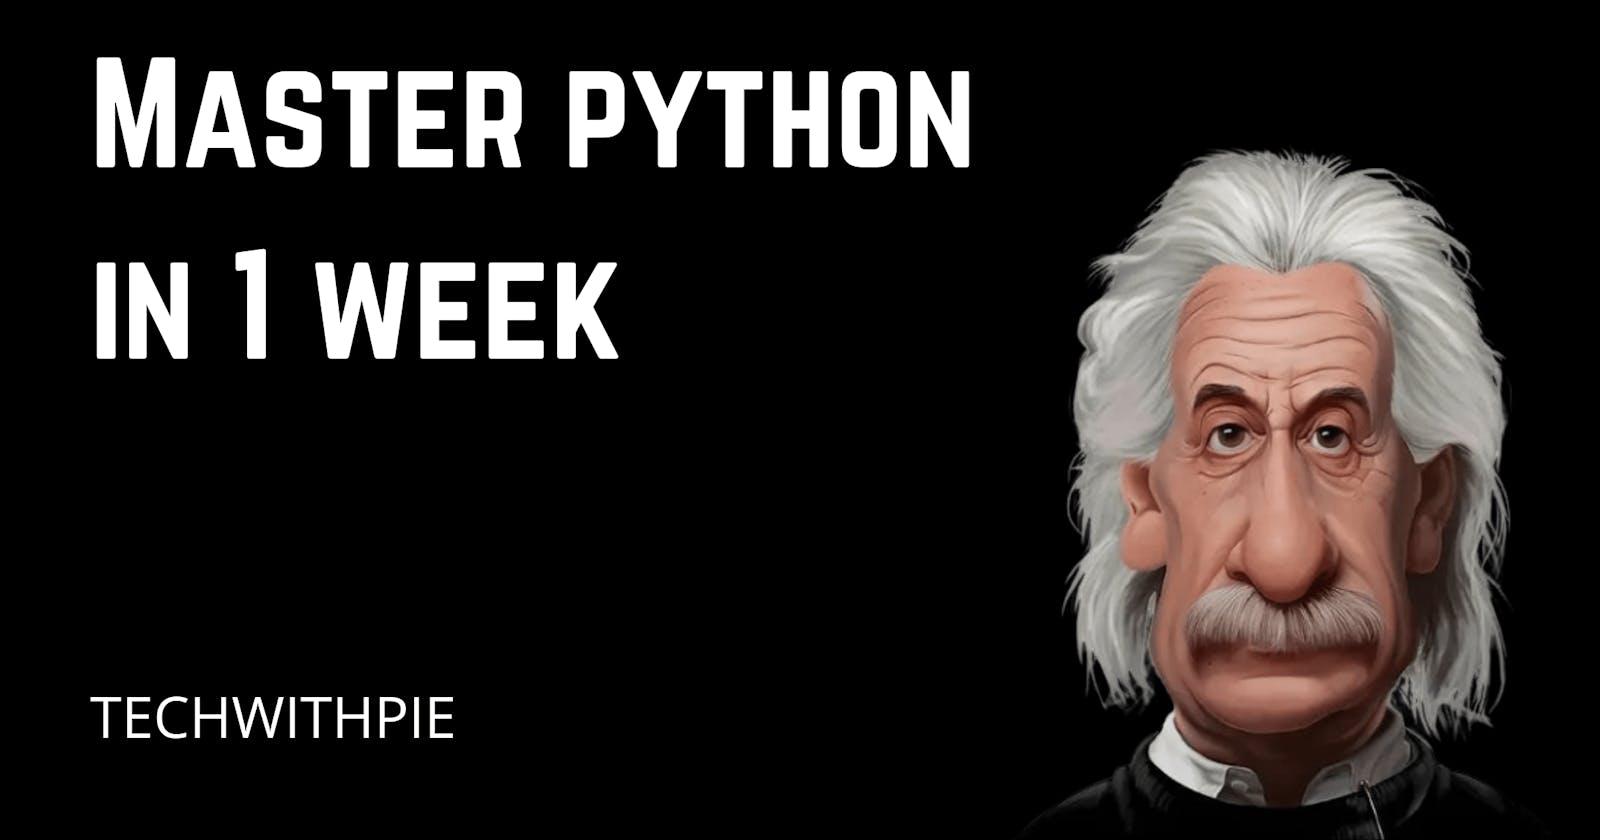 How to master python in one week